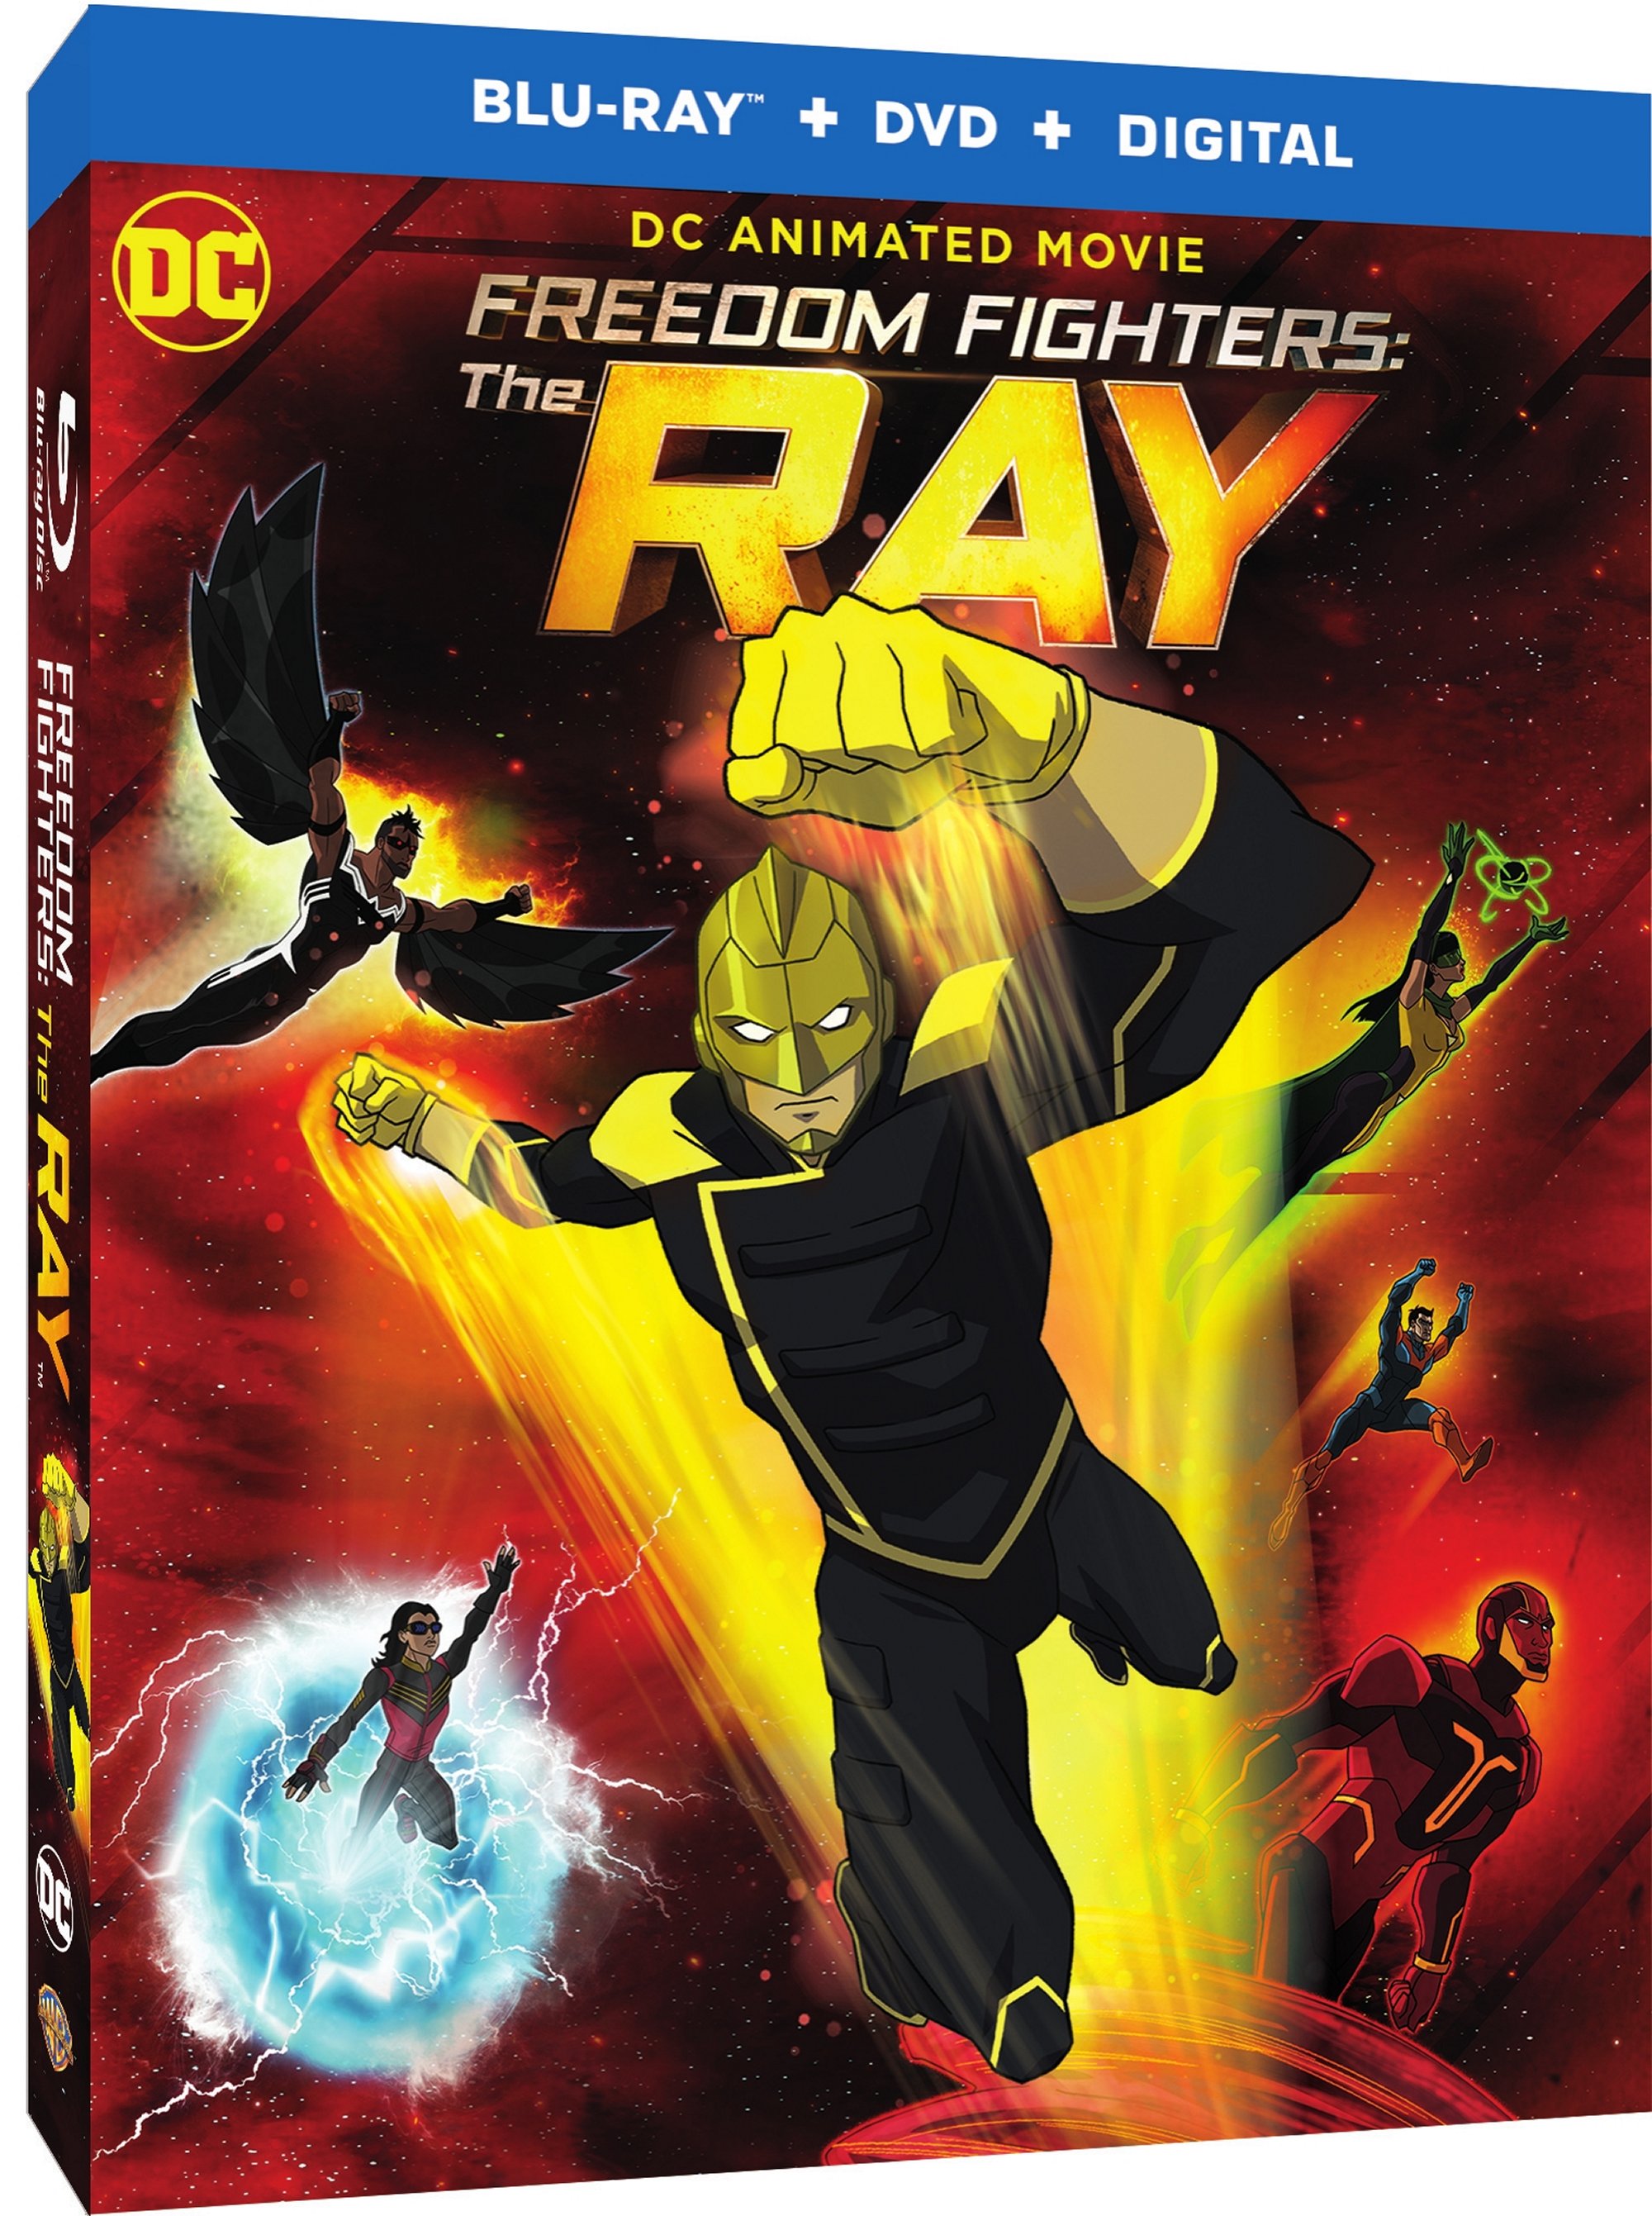 Freedom Fighters The Ray CW Seed Warner bros release The Ray Blu-ray Combo Pack